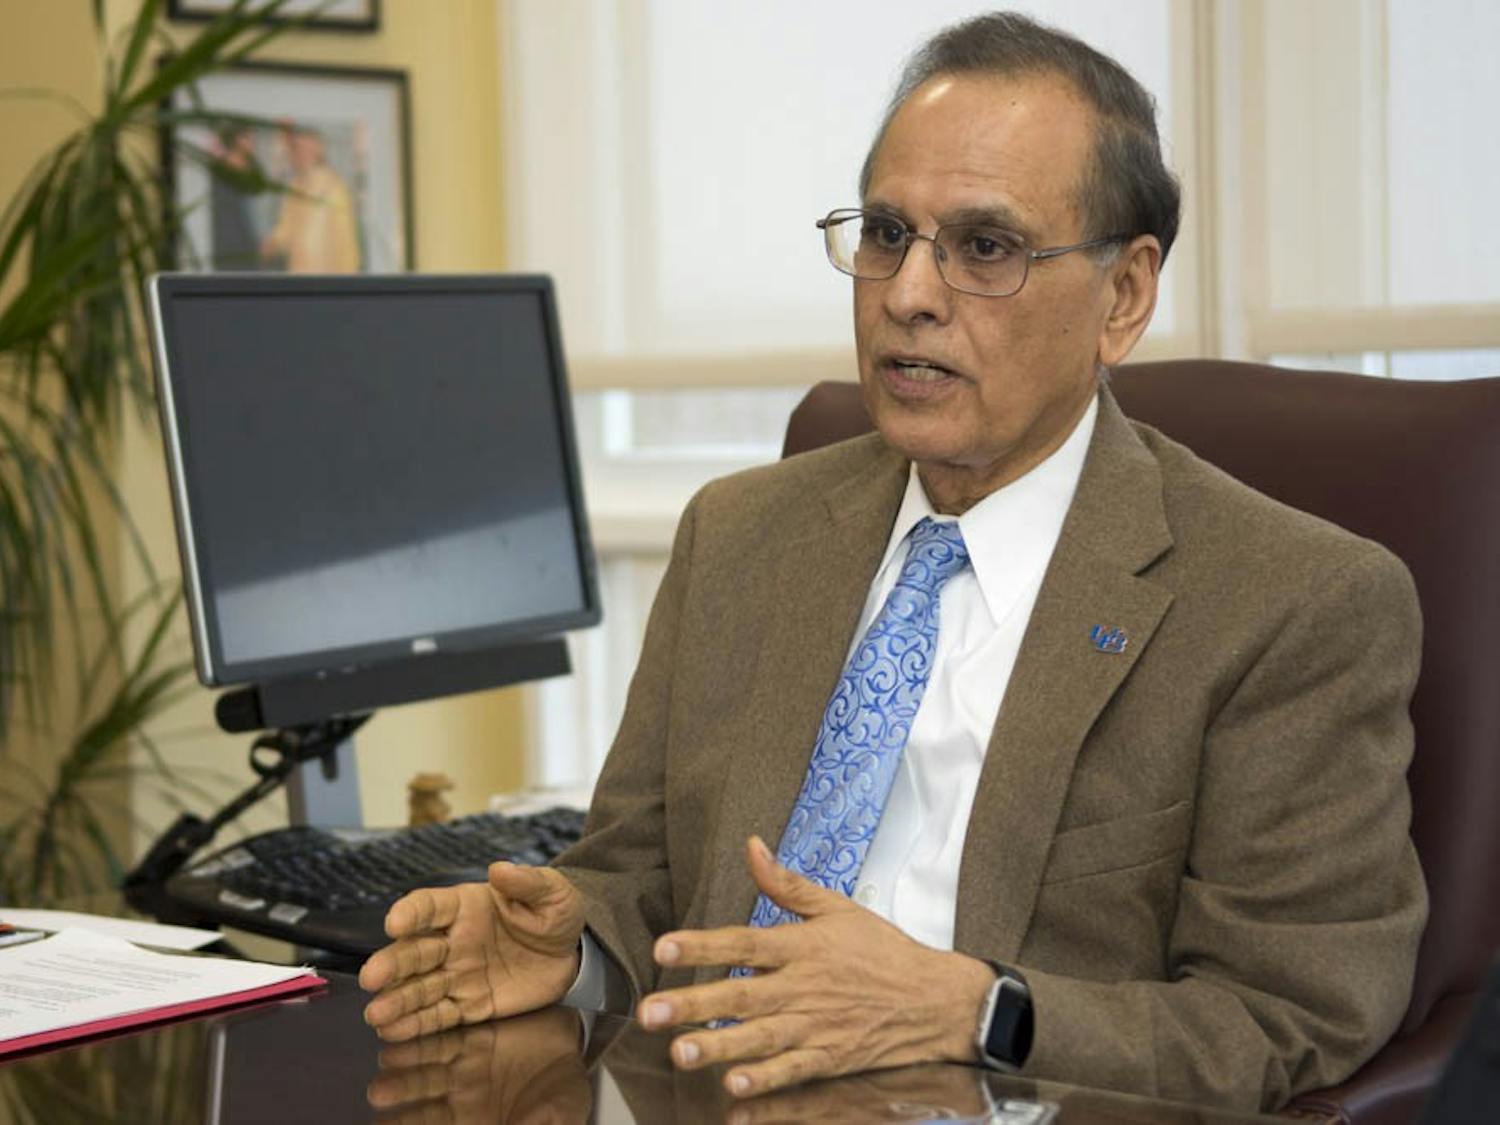 President Satish Tripathi sat with The Spectrum Wednesday afternoon in his presidential office. He was cheerful and smiled when talking about the success of the university.